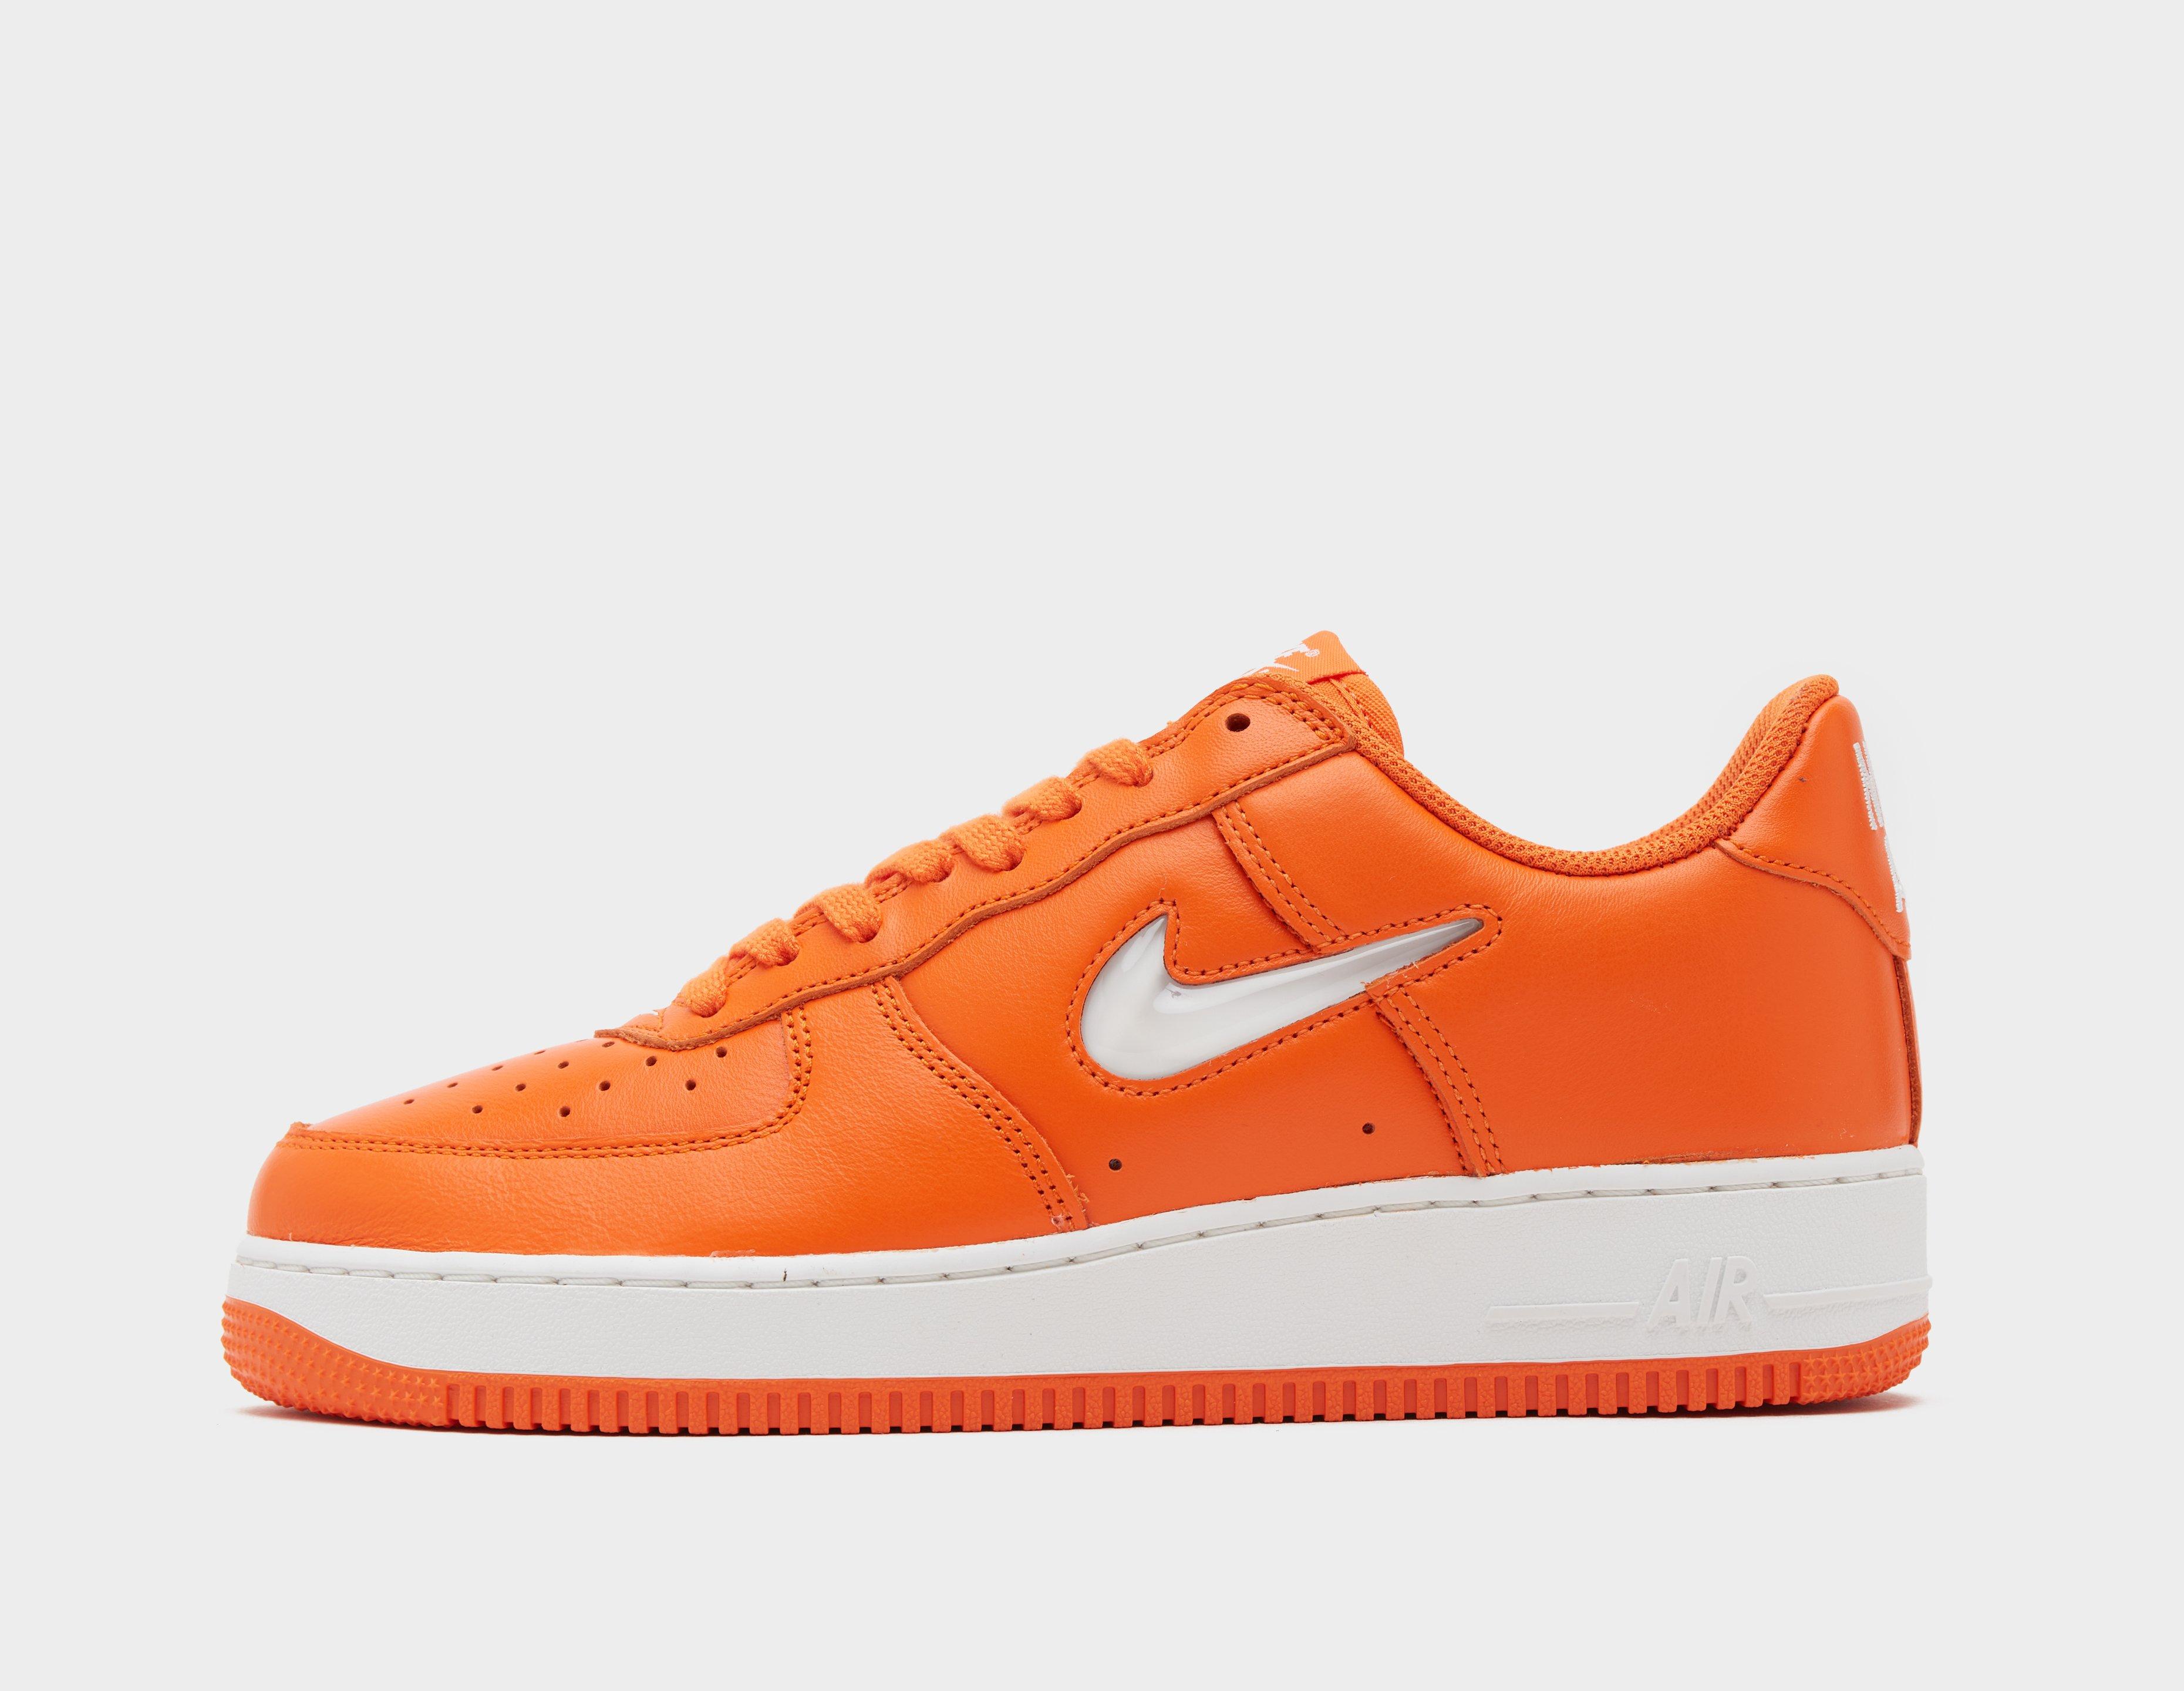 Baron Ongeldig Reden Classicfuncenter? | Orange Nike Air Force 1 Low Retro 'Colour of the Month'  | nike air max flyposite purple shoes sale today